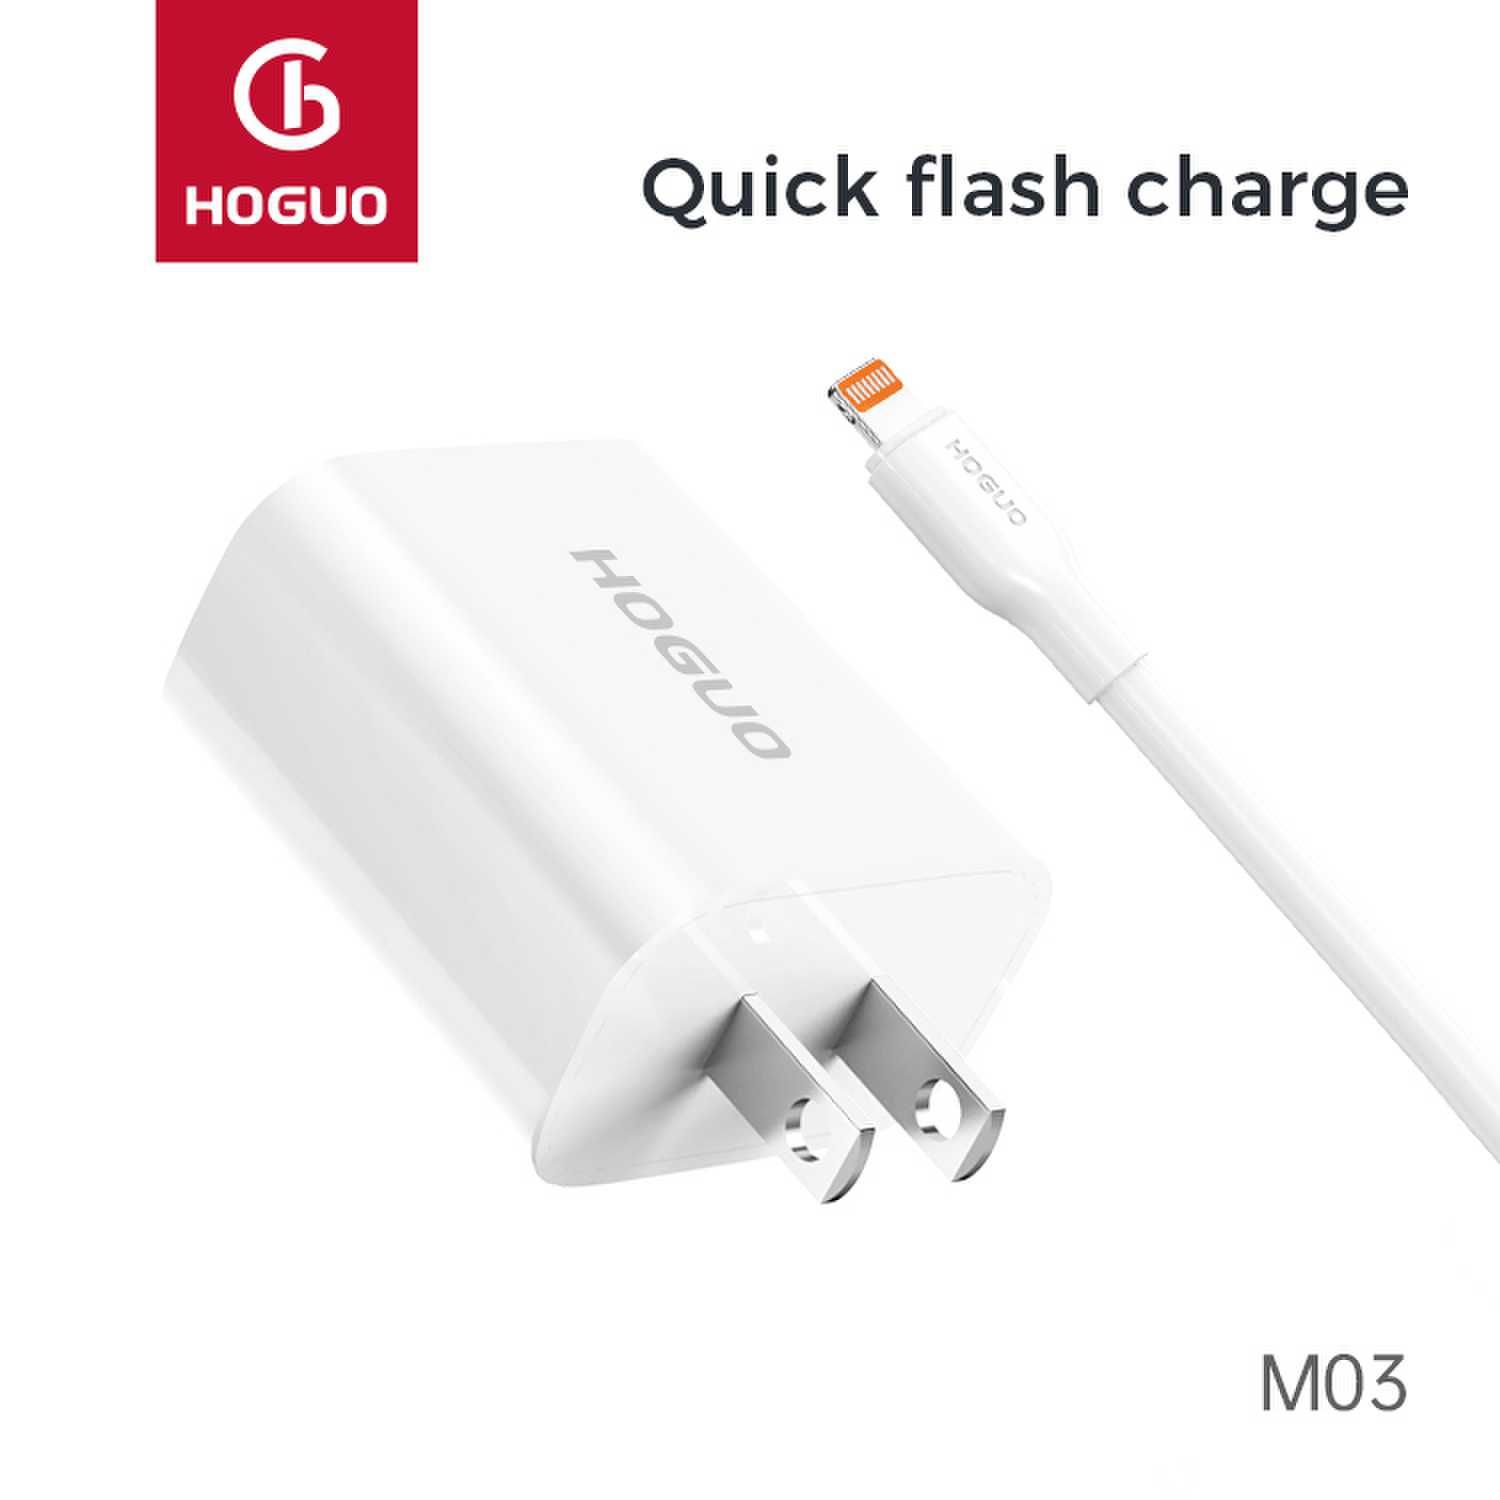 HOGUO M03 QC3.0 18W fast charger-Classic series